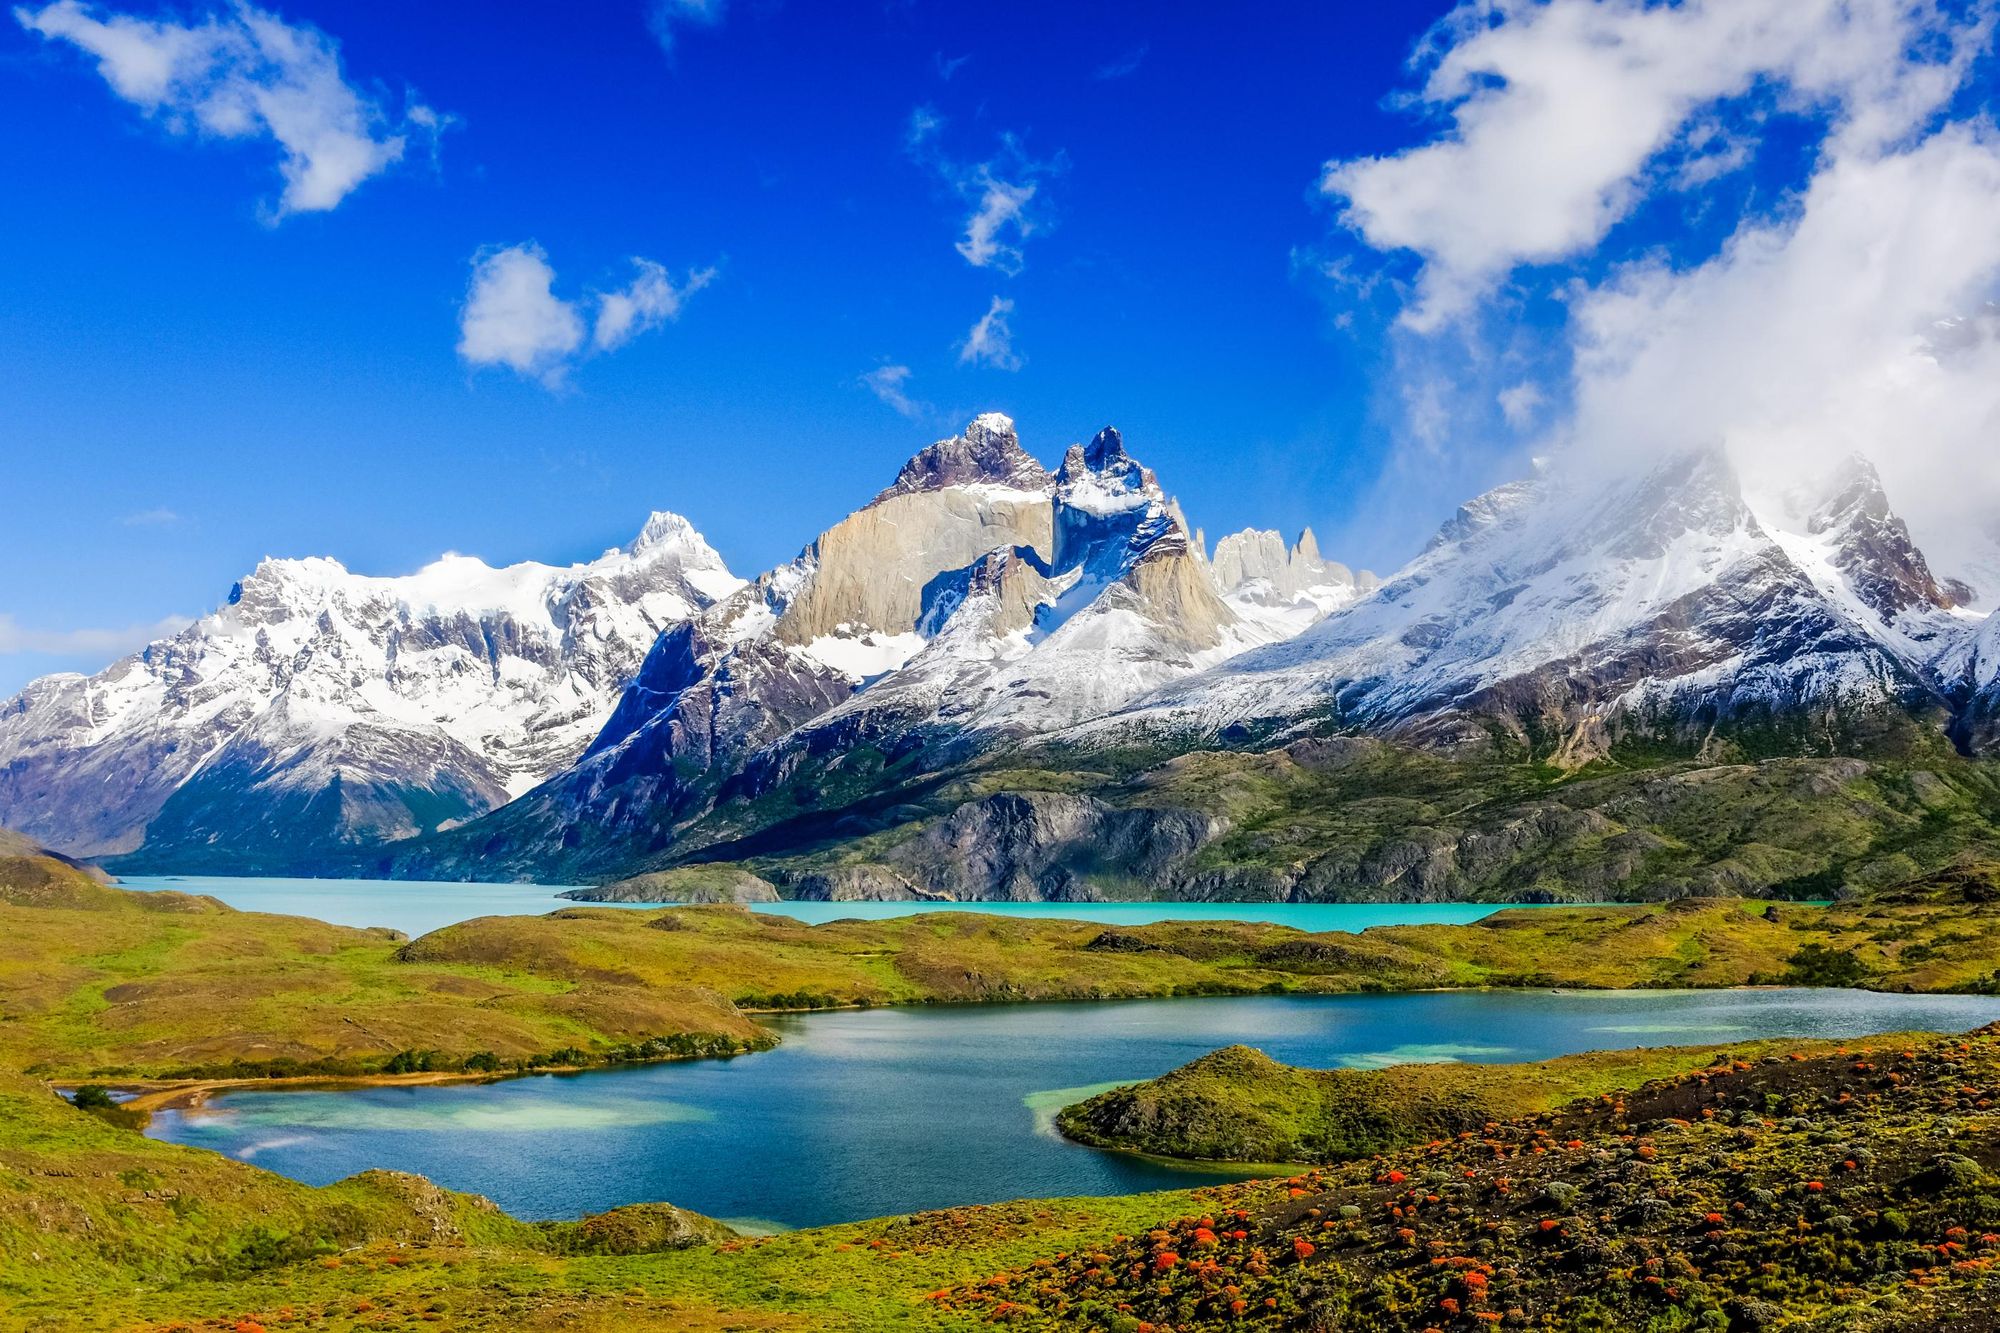 The jagged mountains of Torres del Paine, punctuated by lakes. Photo: Getty